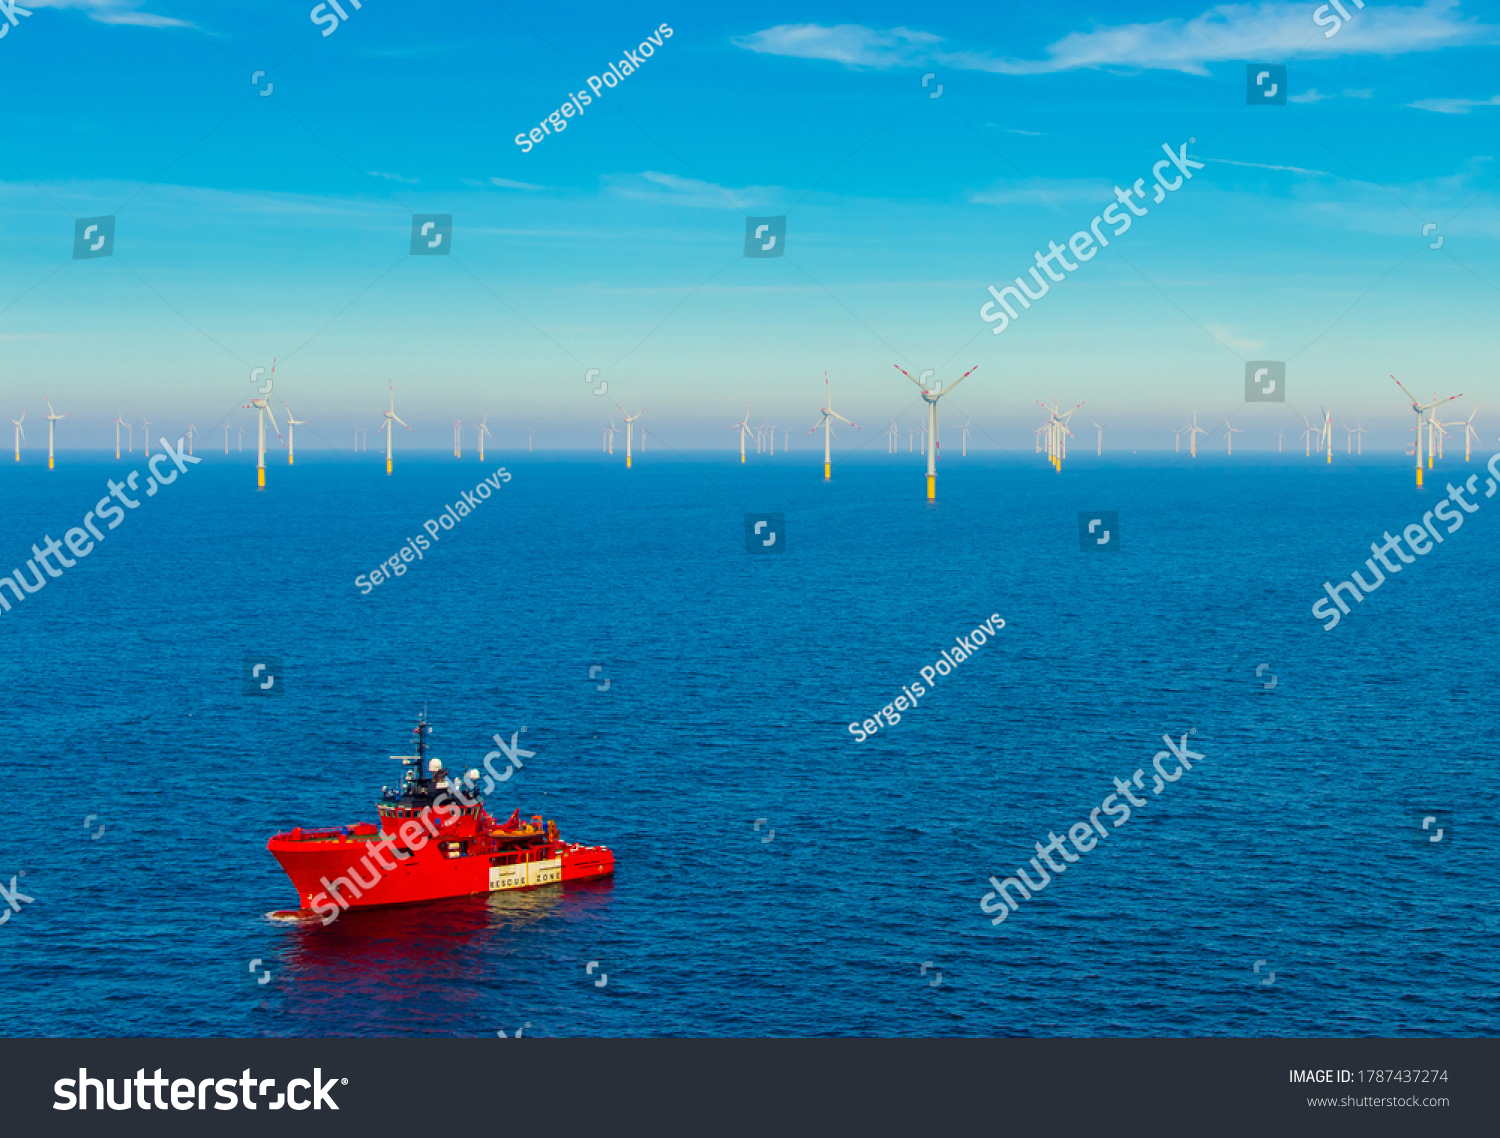 Offshore standby vessel in the North Sea #1787437274